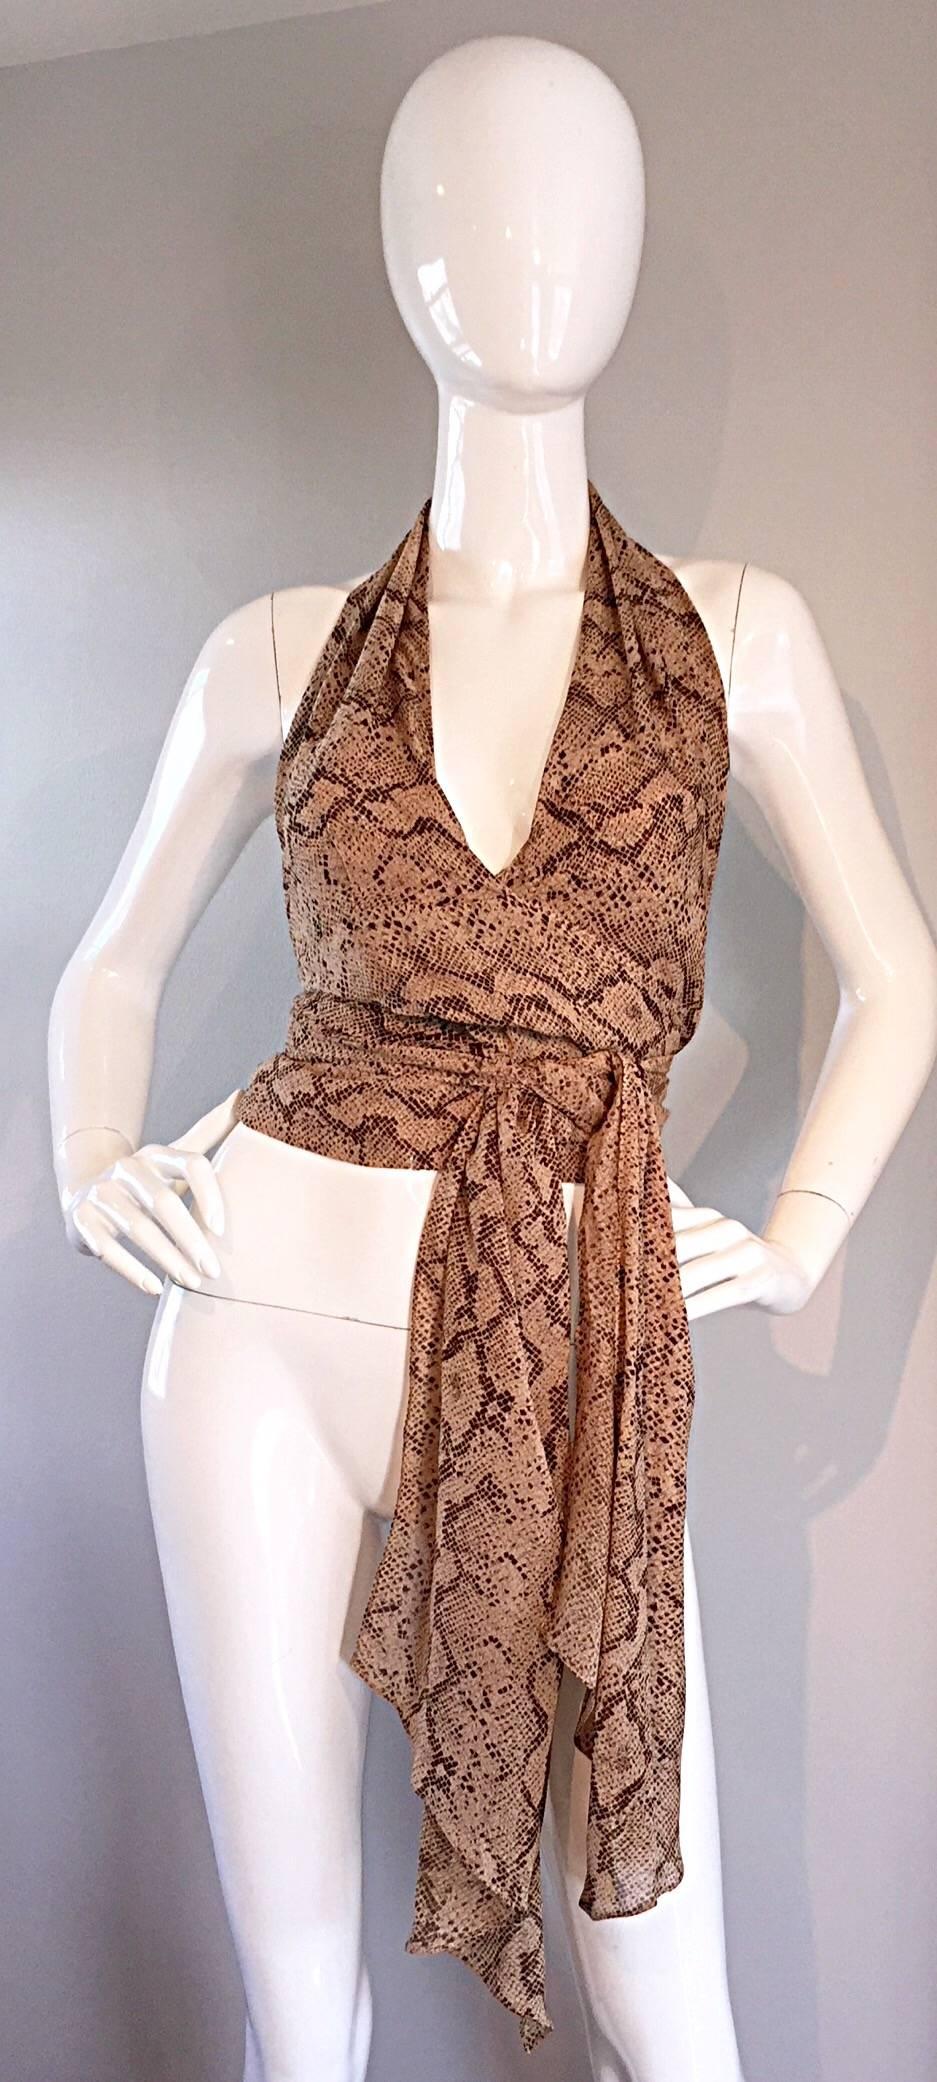 Amazing 1990s / 90s Sophie Sitbon silk chiffon blouse! Chic snakeskin python print. Layers of airy snake printed chiffon, that can wrap in the front, or back. Looks amazing with the vintage Christian Lacroix (pictured) in my 1stDibs Shop! Made in